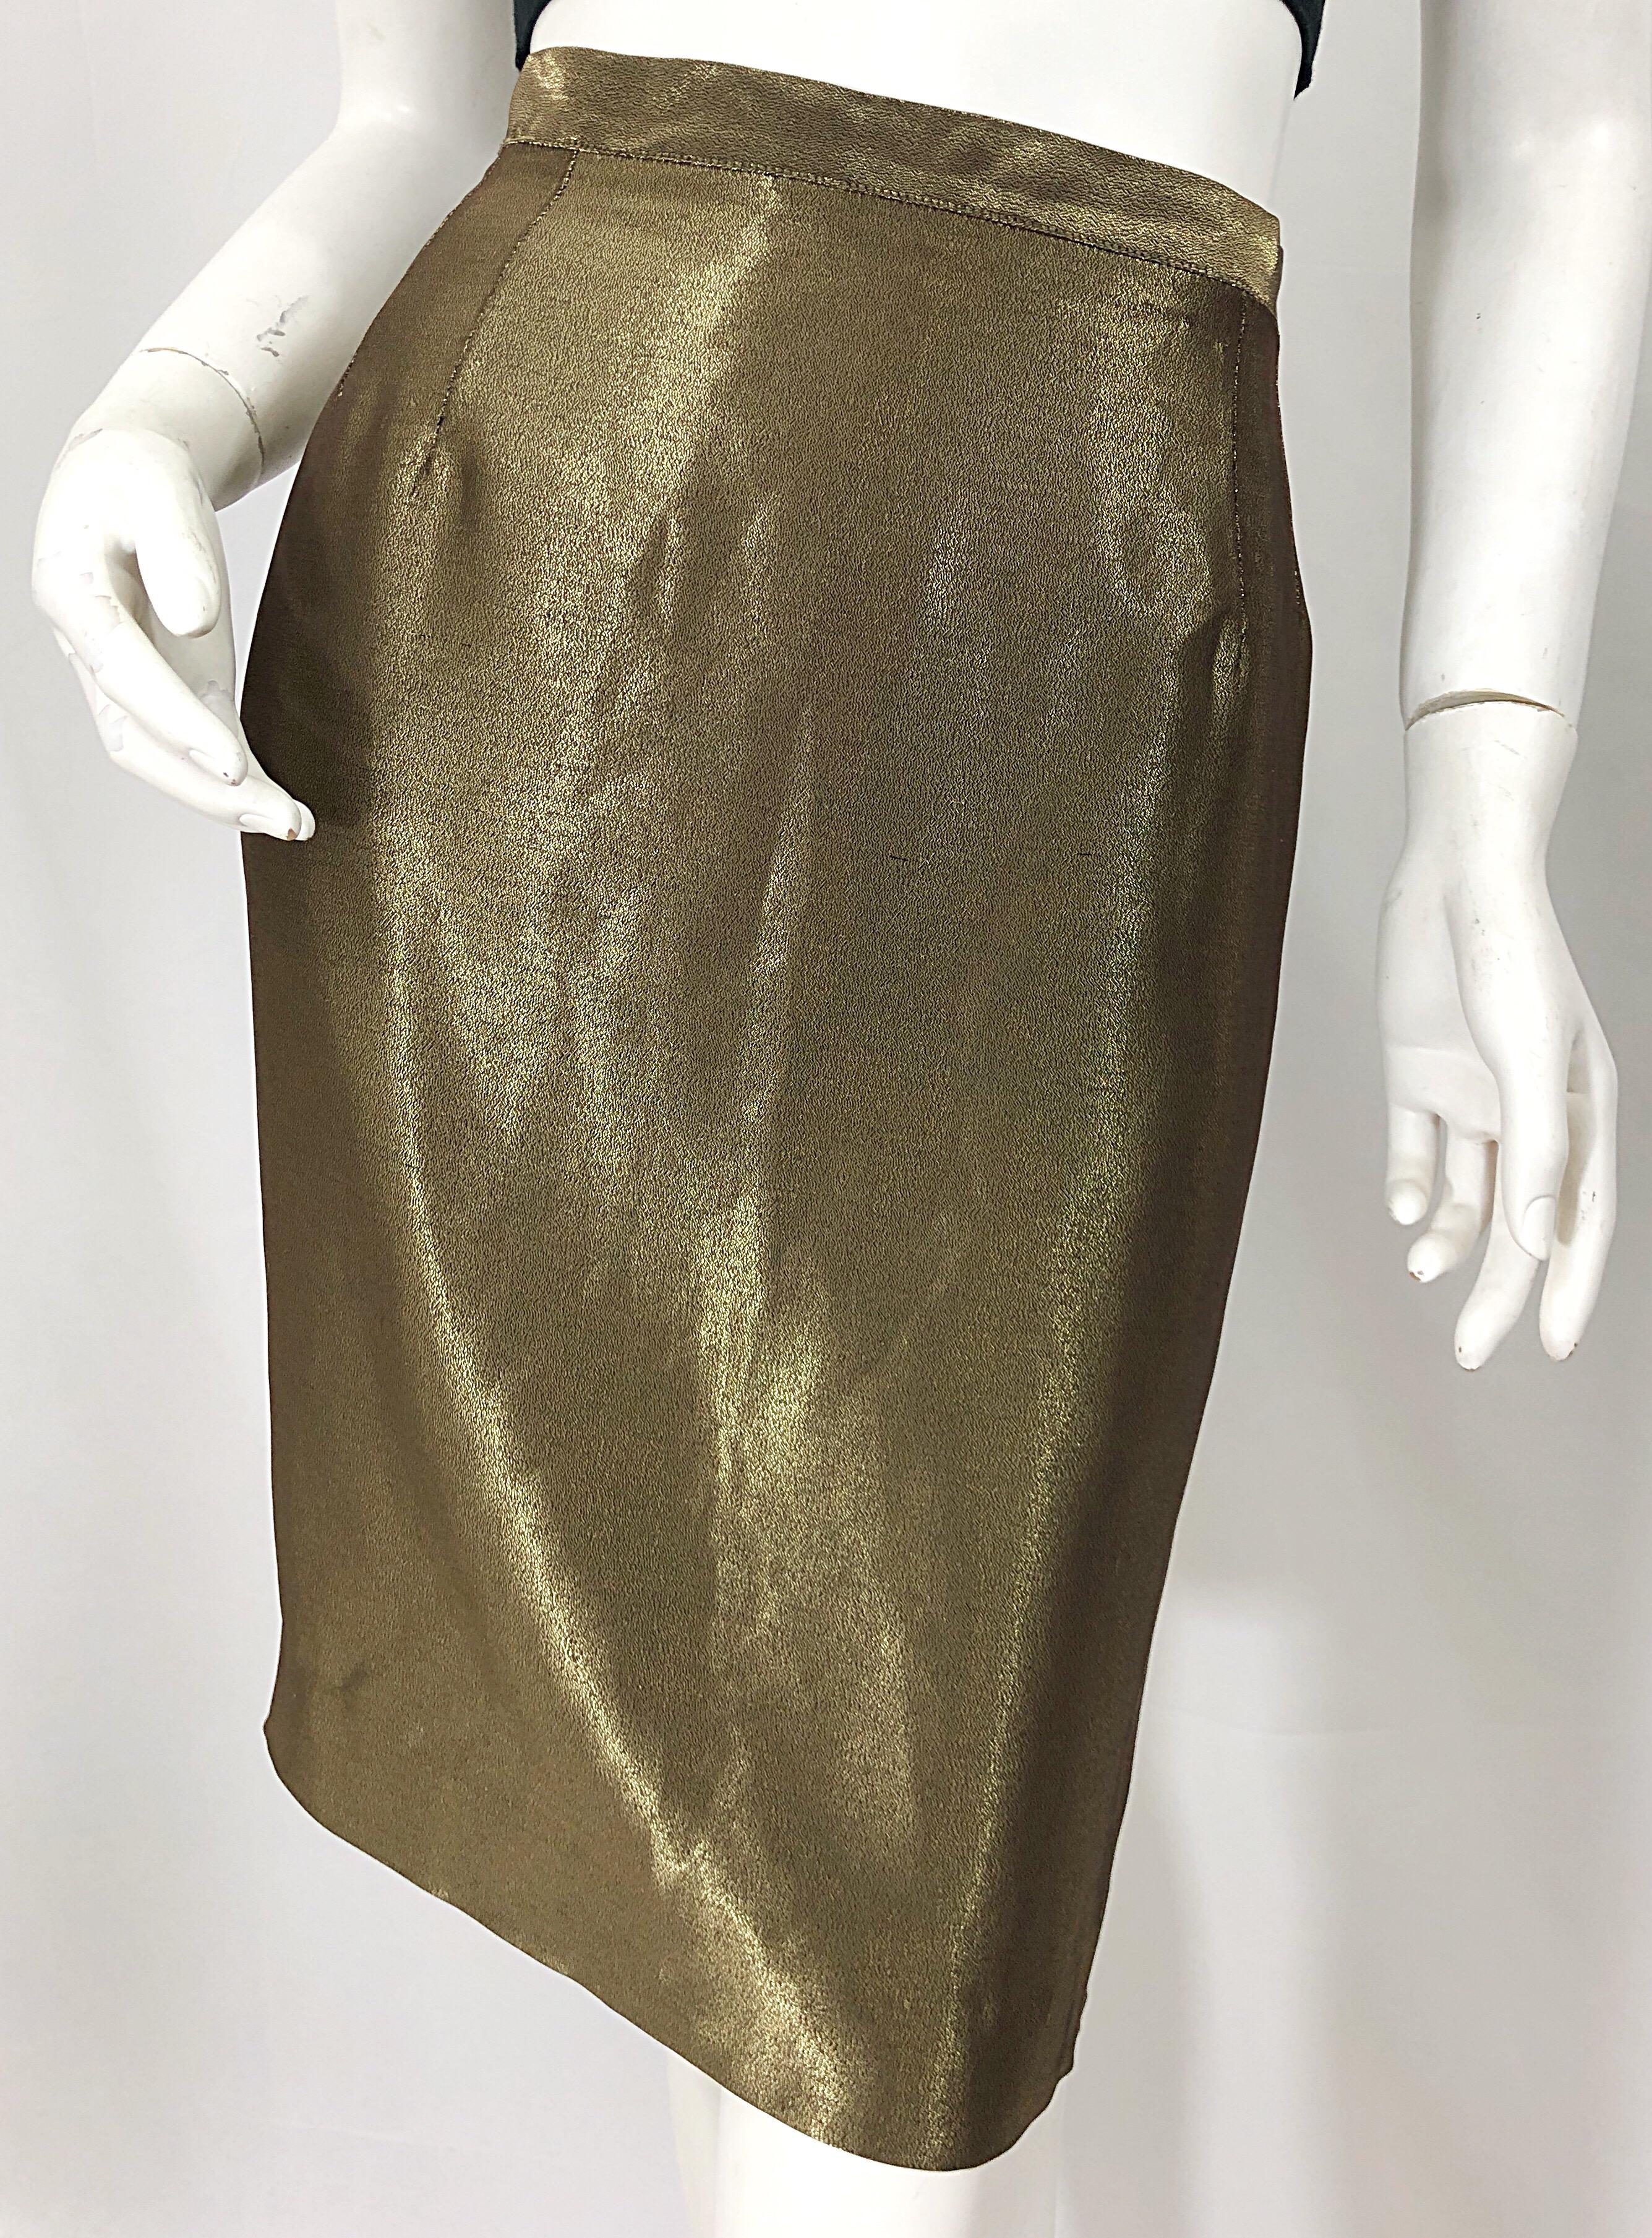 1990s Gianfranco Ferre Size 44 / 8 Metallic Bronze Gold High Waist Pencil Skirt In Excellent Condition For Sale In San Diego, CA